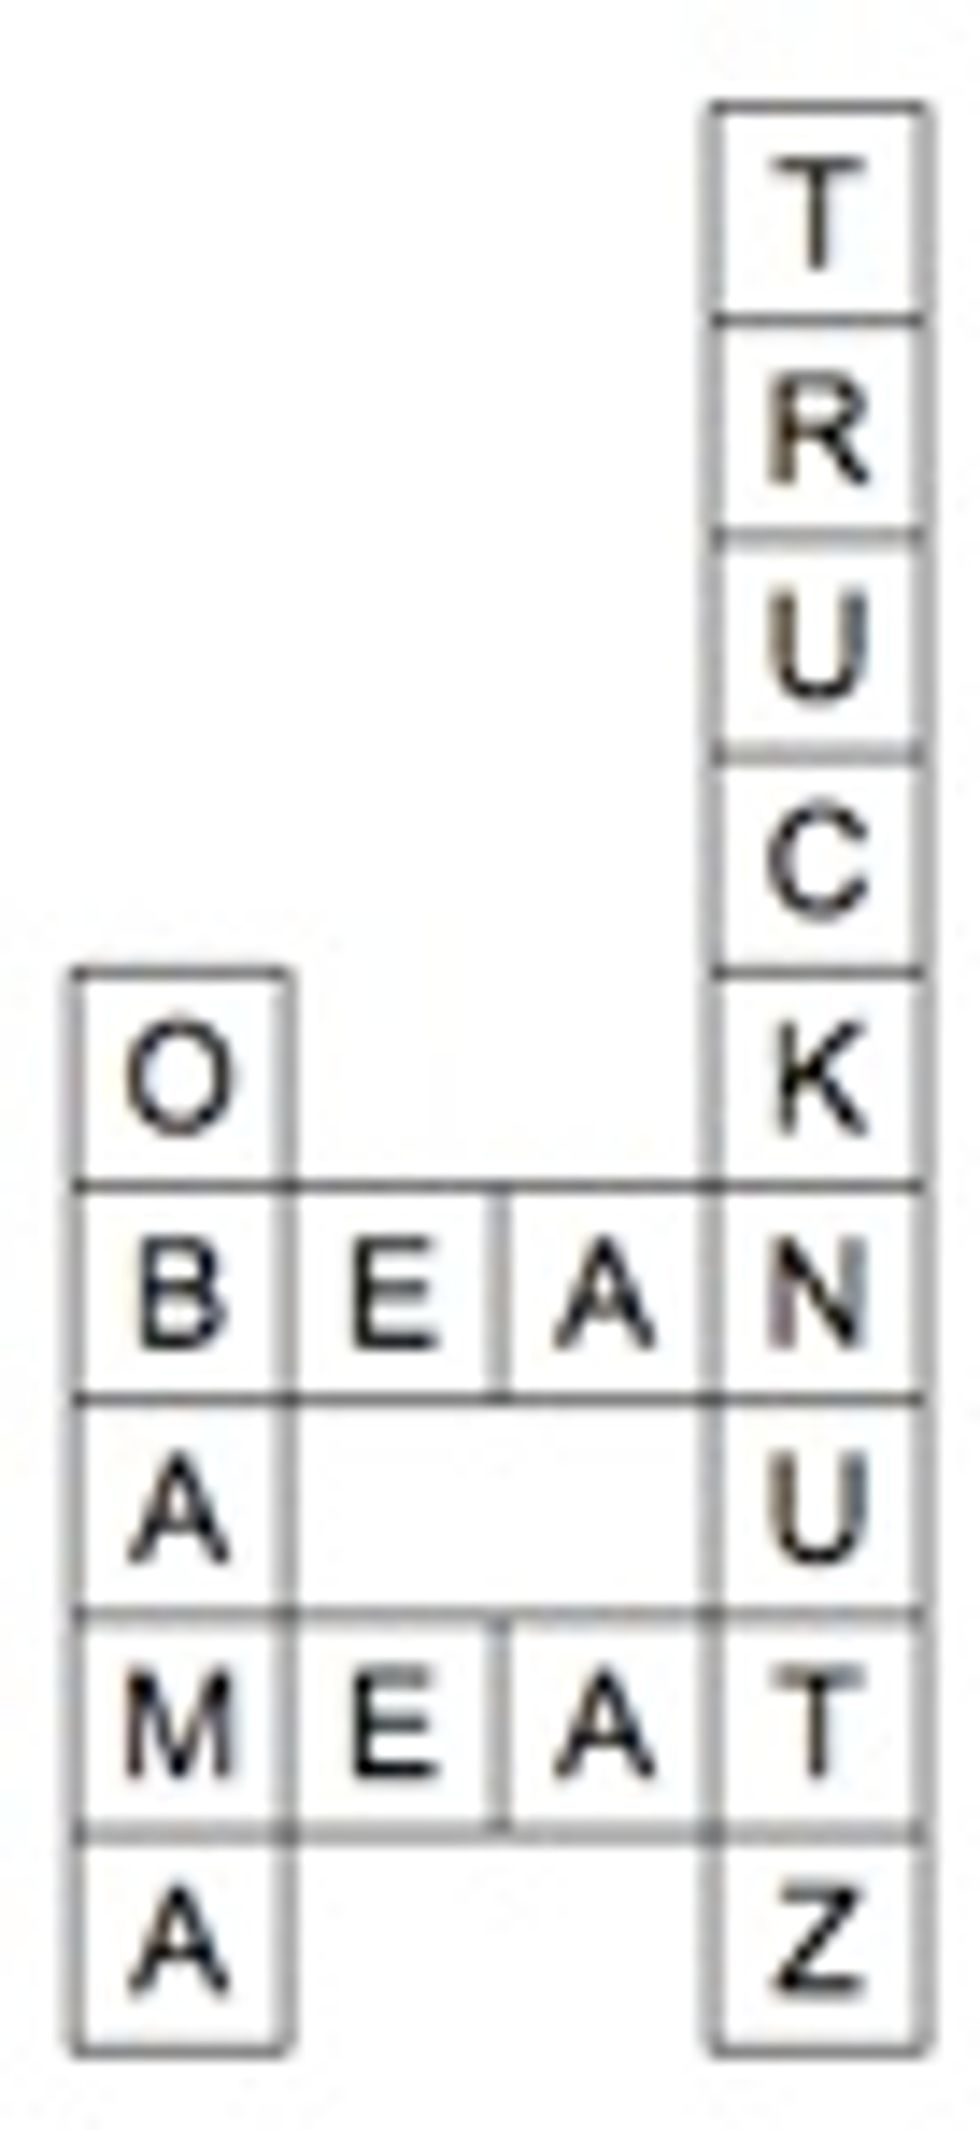 'Times' Crossword Puzzles In The Tank For Obama